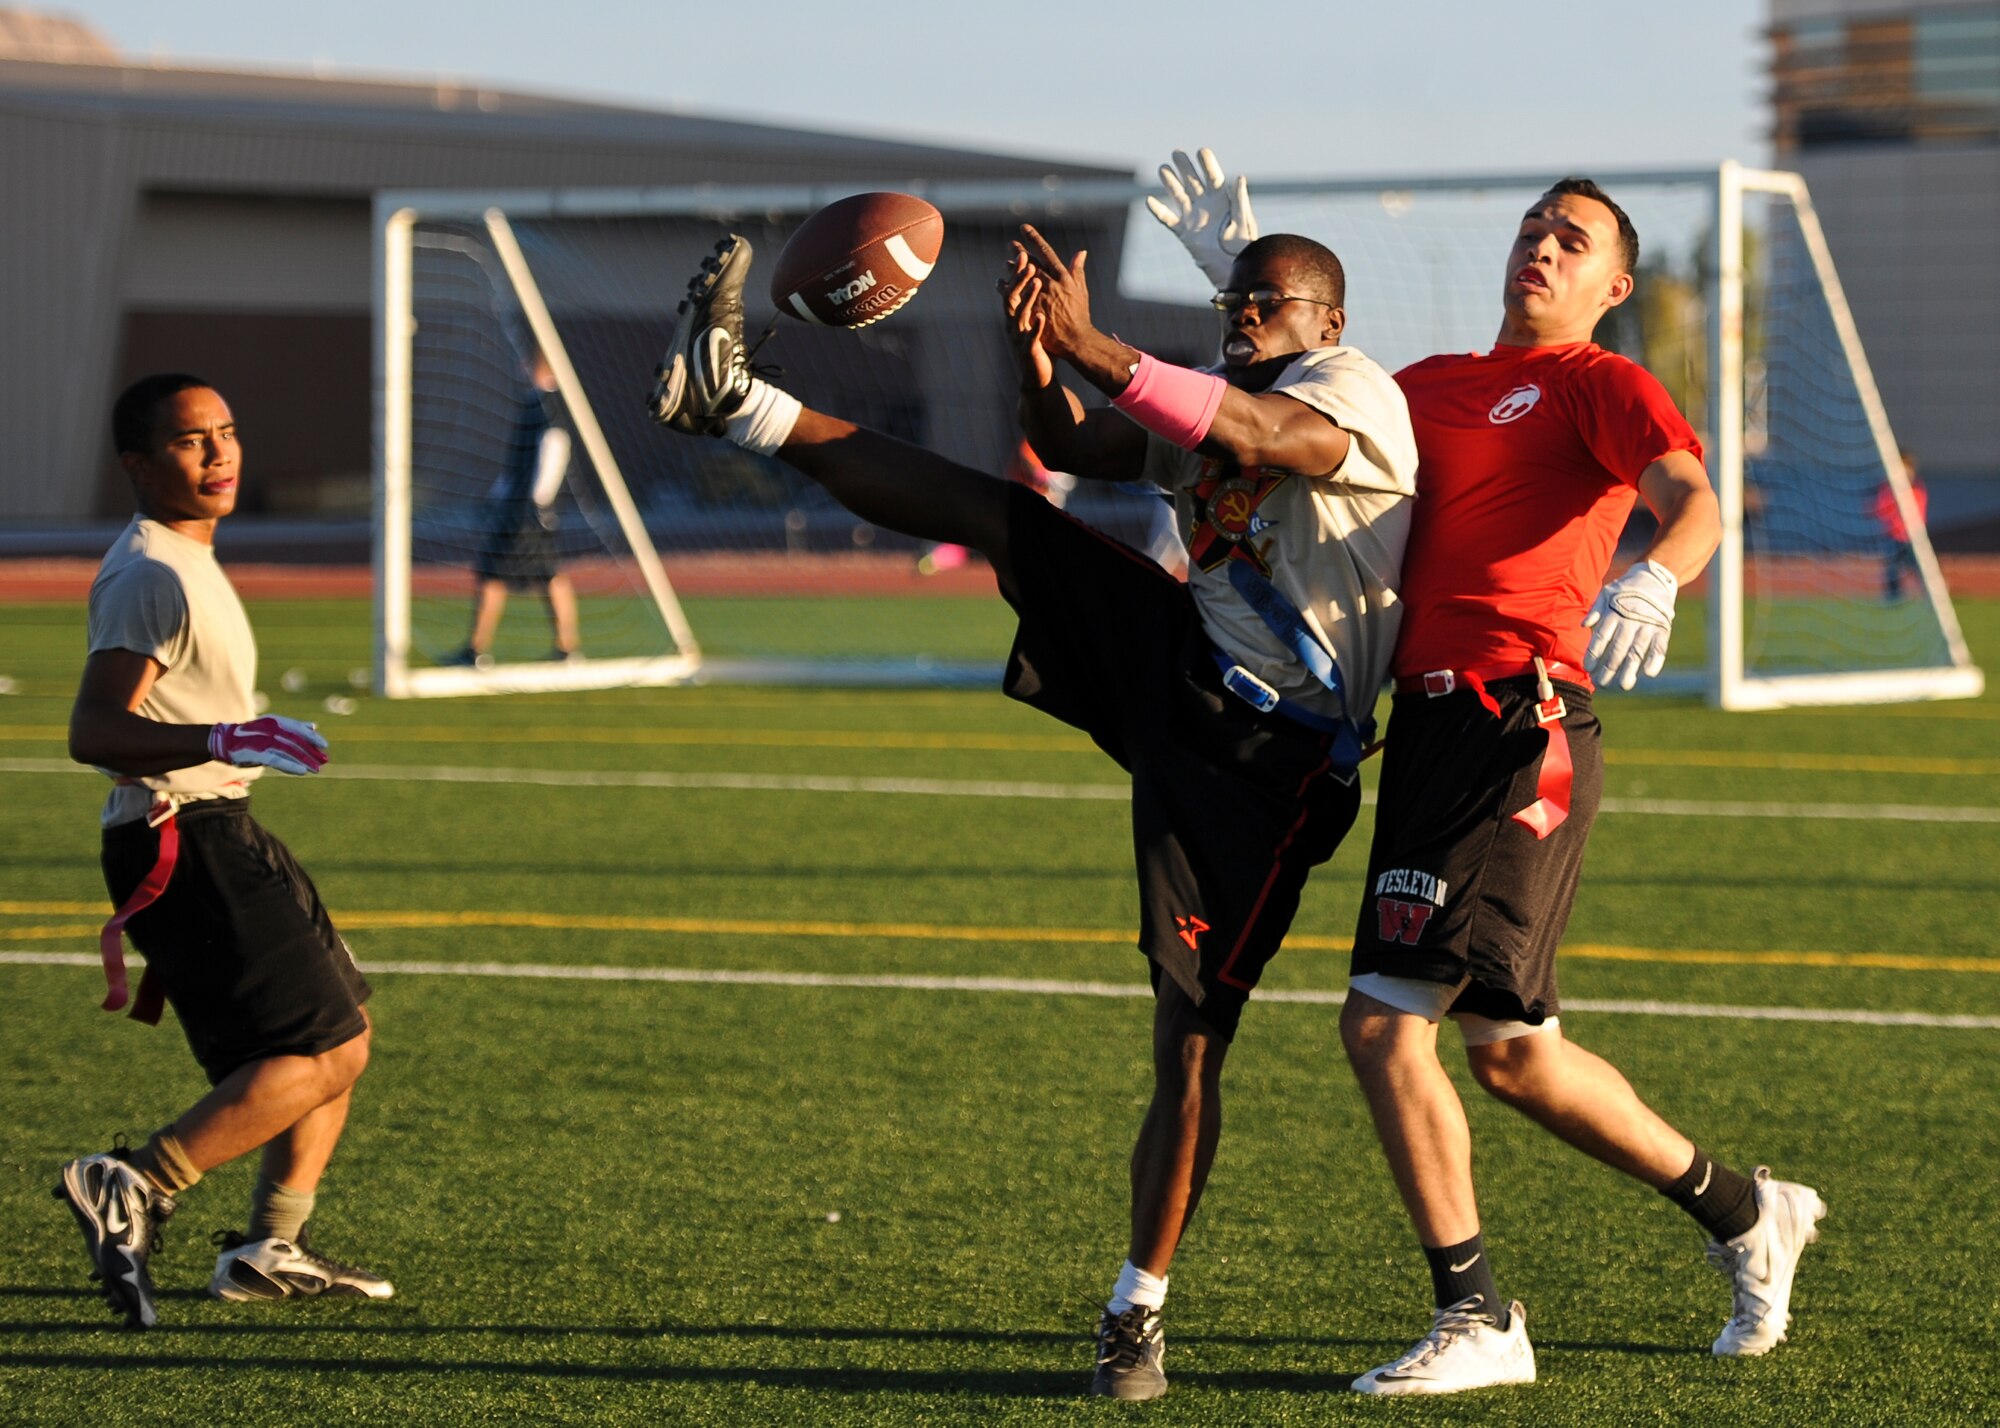 A member of the 757th Aircraft Maintenance Squadron’s Flanker team attempts to grab a pass during a game against the 757th AMXS’ Thunder team at Nellis Air Force Base, Nev., Oct. 6, 2014. This year’s intramural flag football season will feature 23 different teams, the highest amount of teams to participate in 10 years. (U.S. Air Force photo by Airman 1st Class Mikaley Towle)